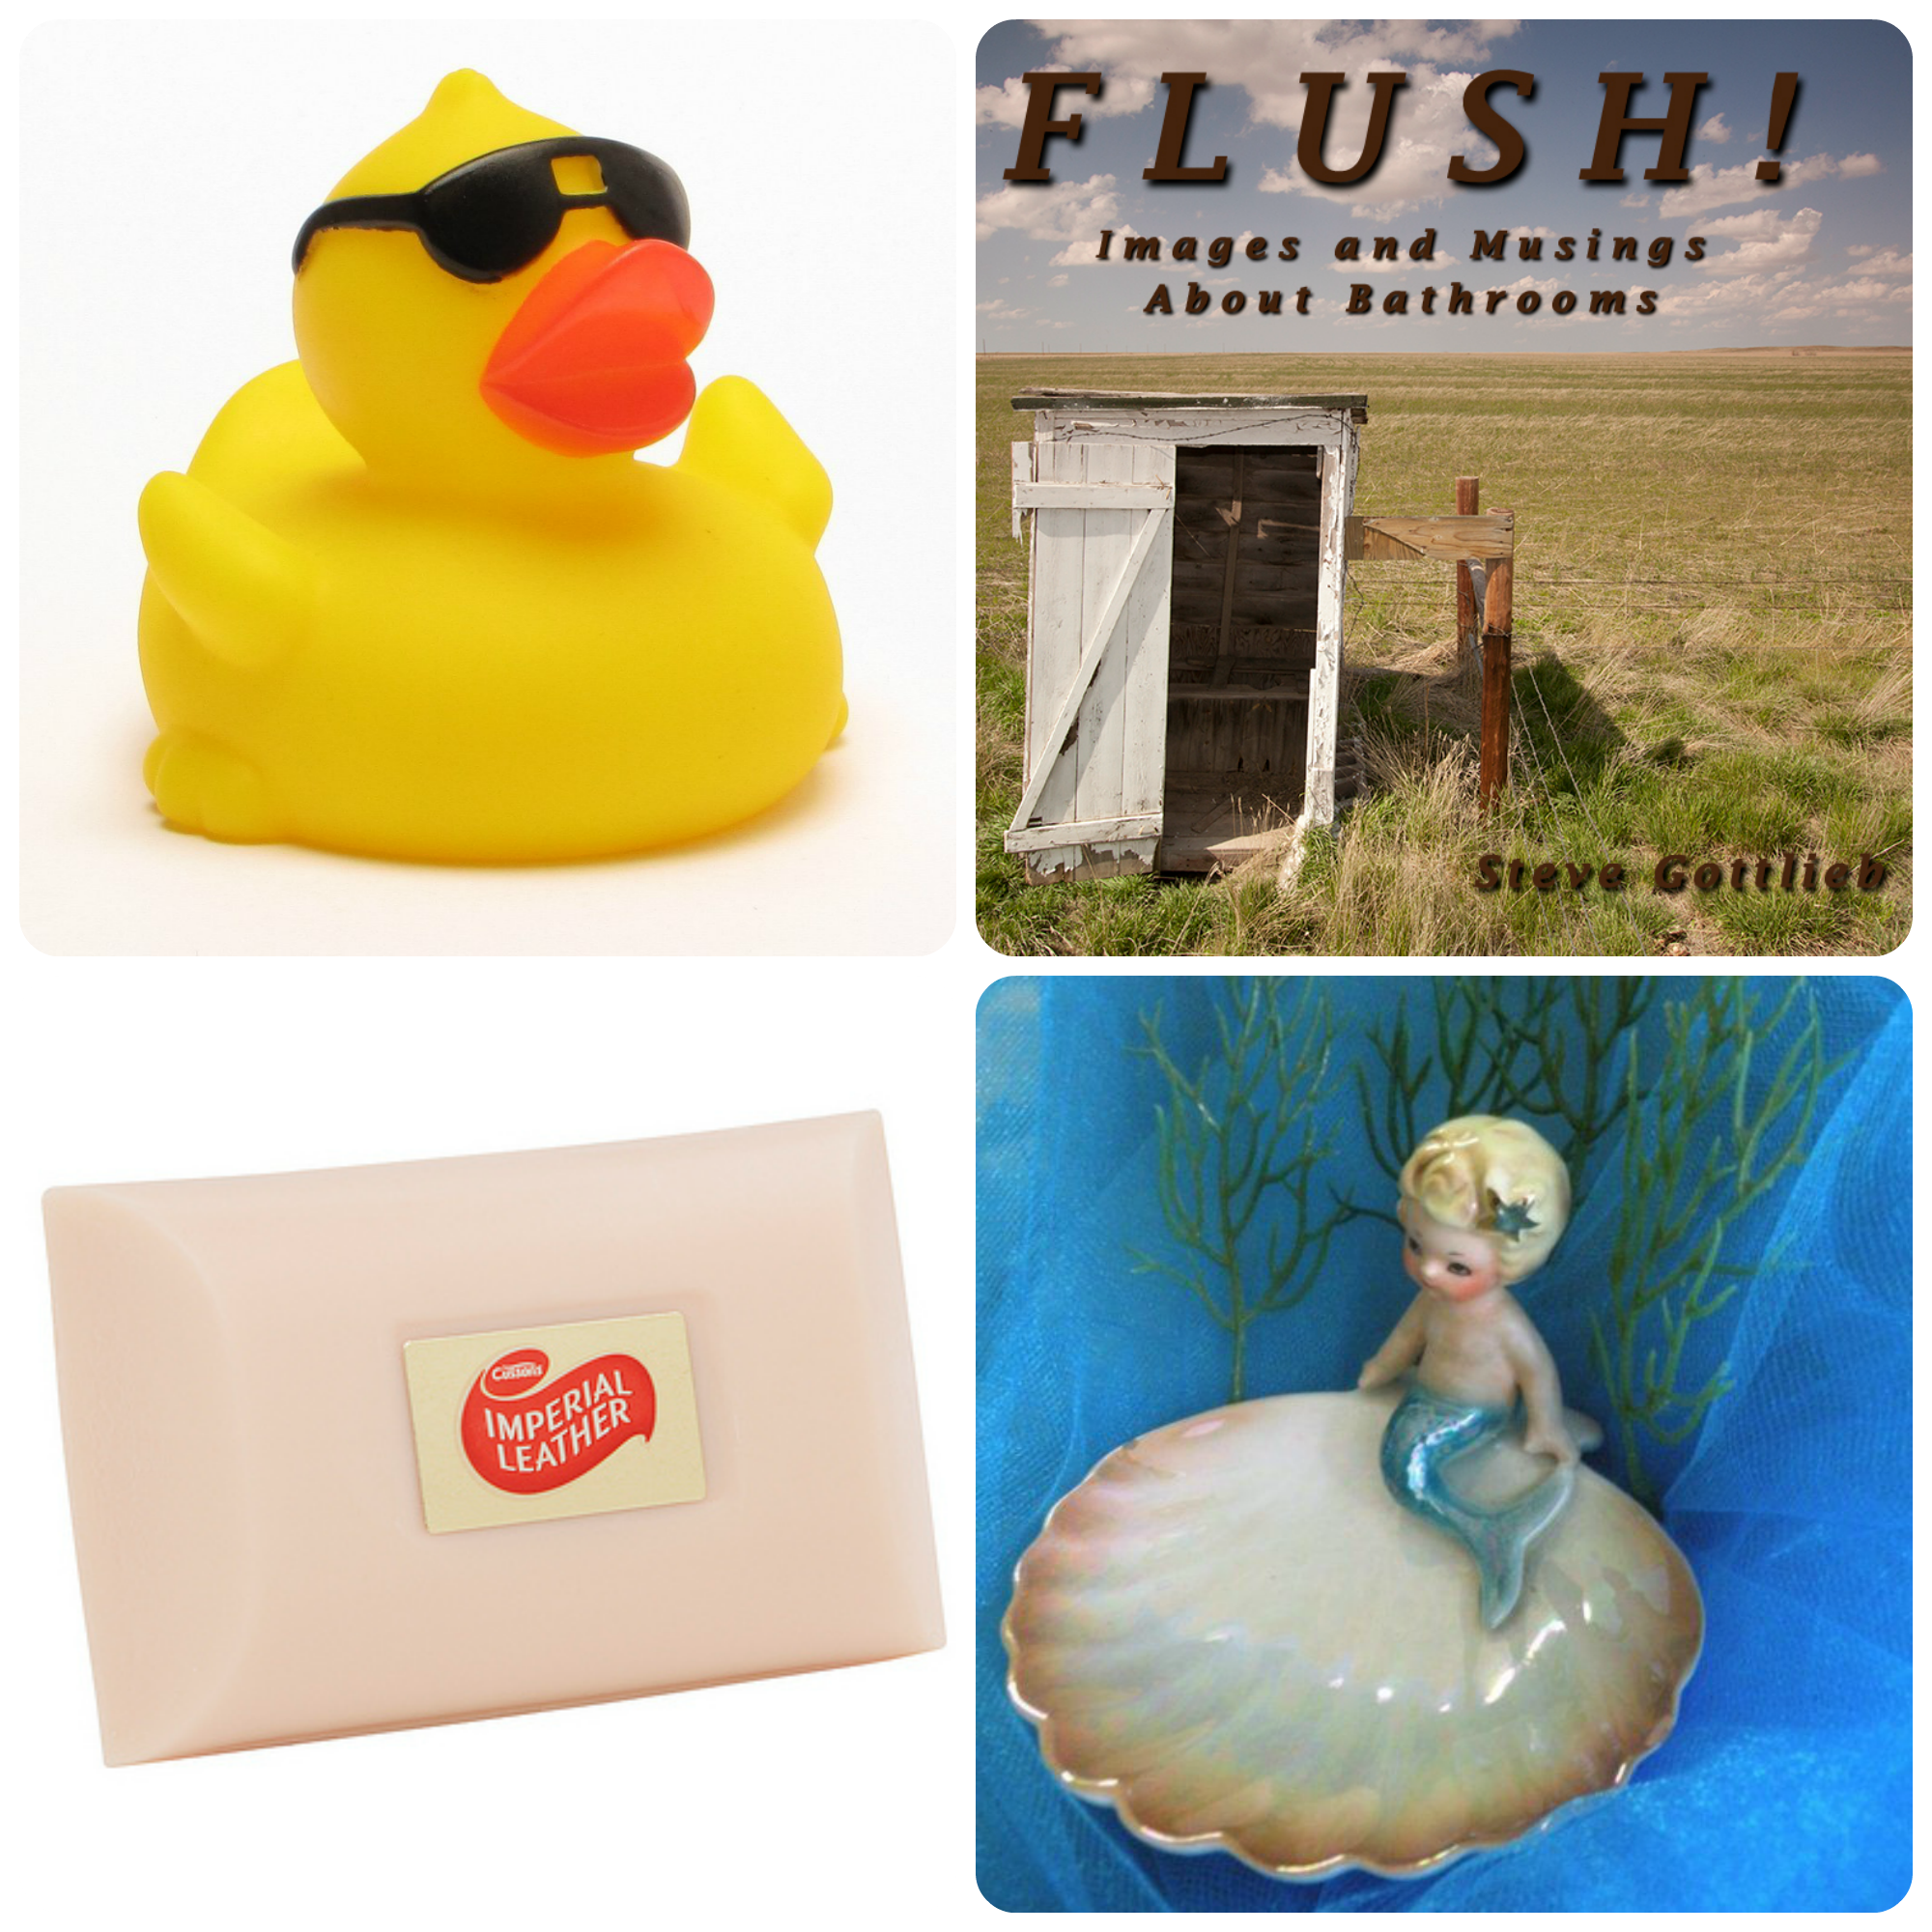 rubber duck wearing shades, imperial leather soap, mermaid soap dish and book called Flush!